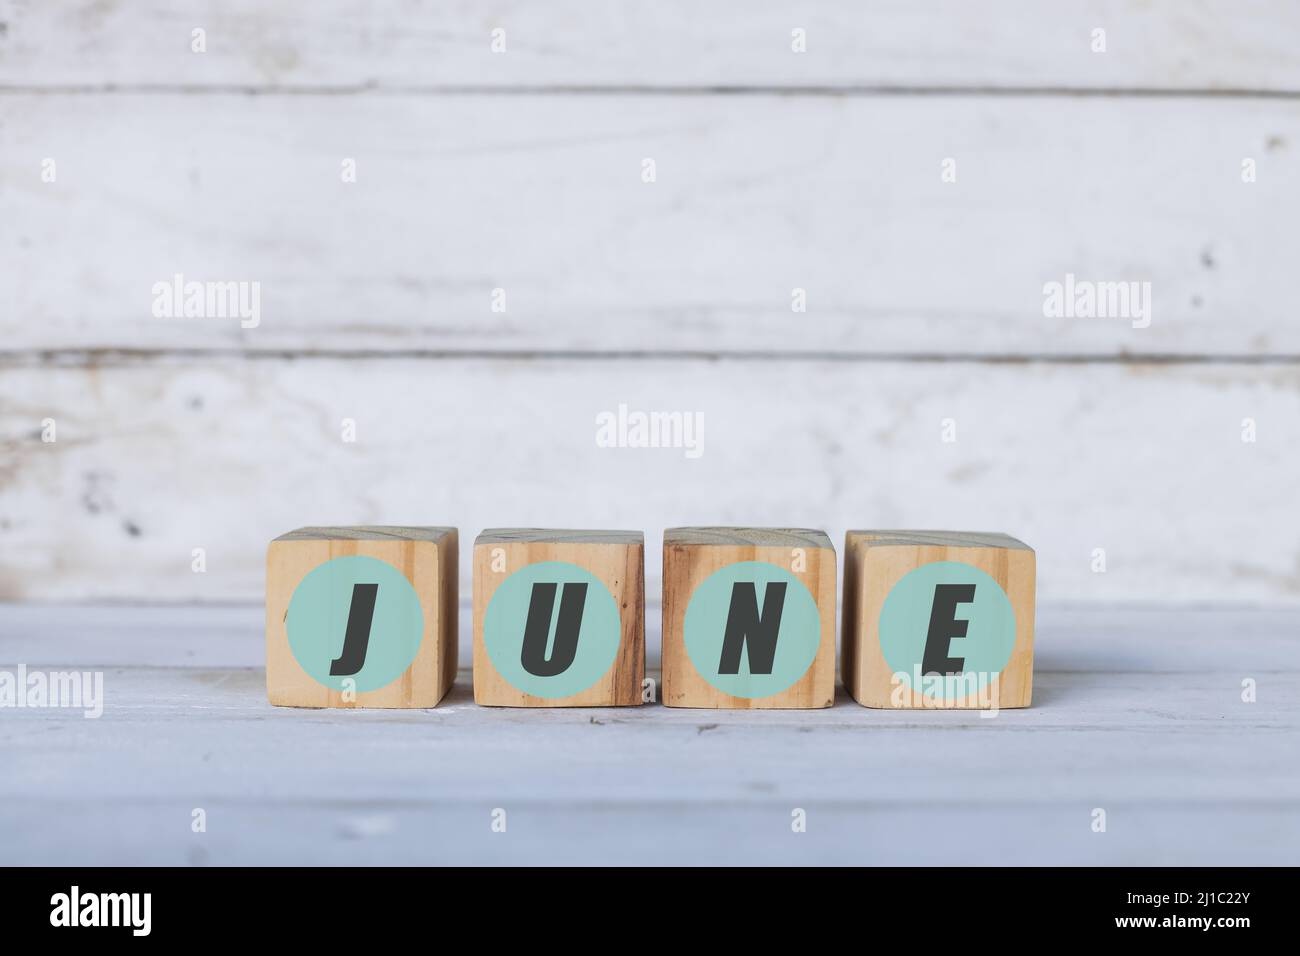 june concept written on wooden cubes or blocks, on white wooden background. Stock Photo